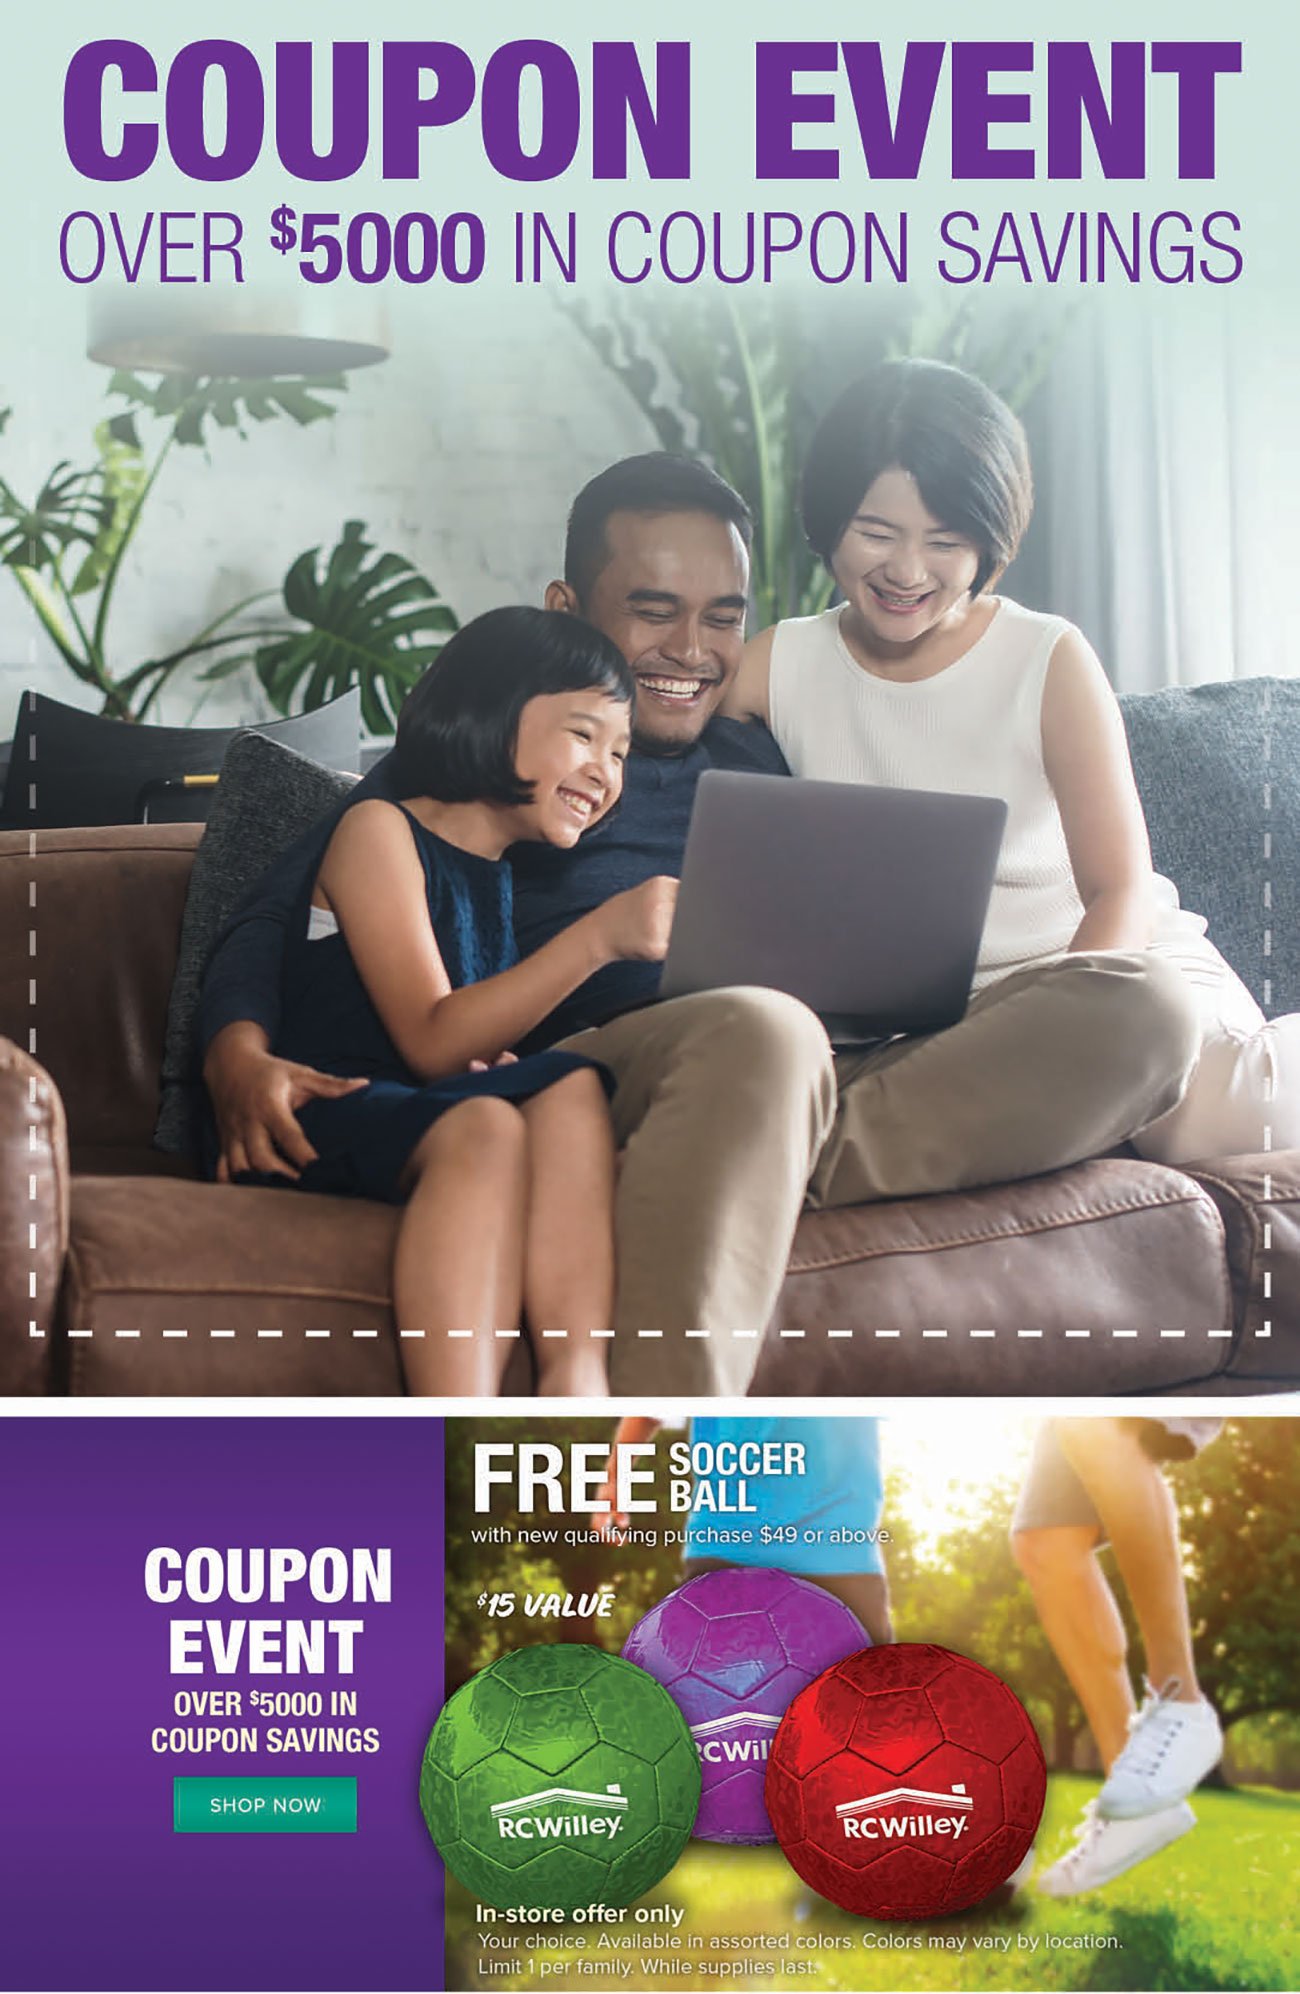 Coupon-Event-Family-Header